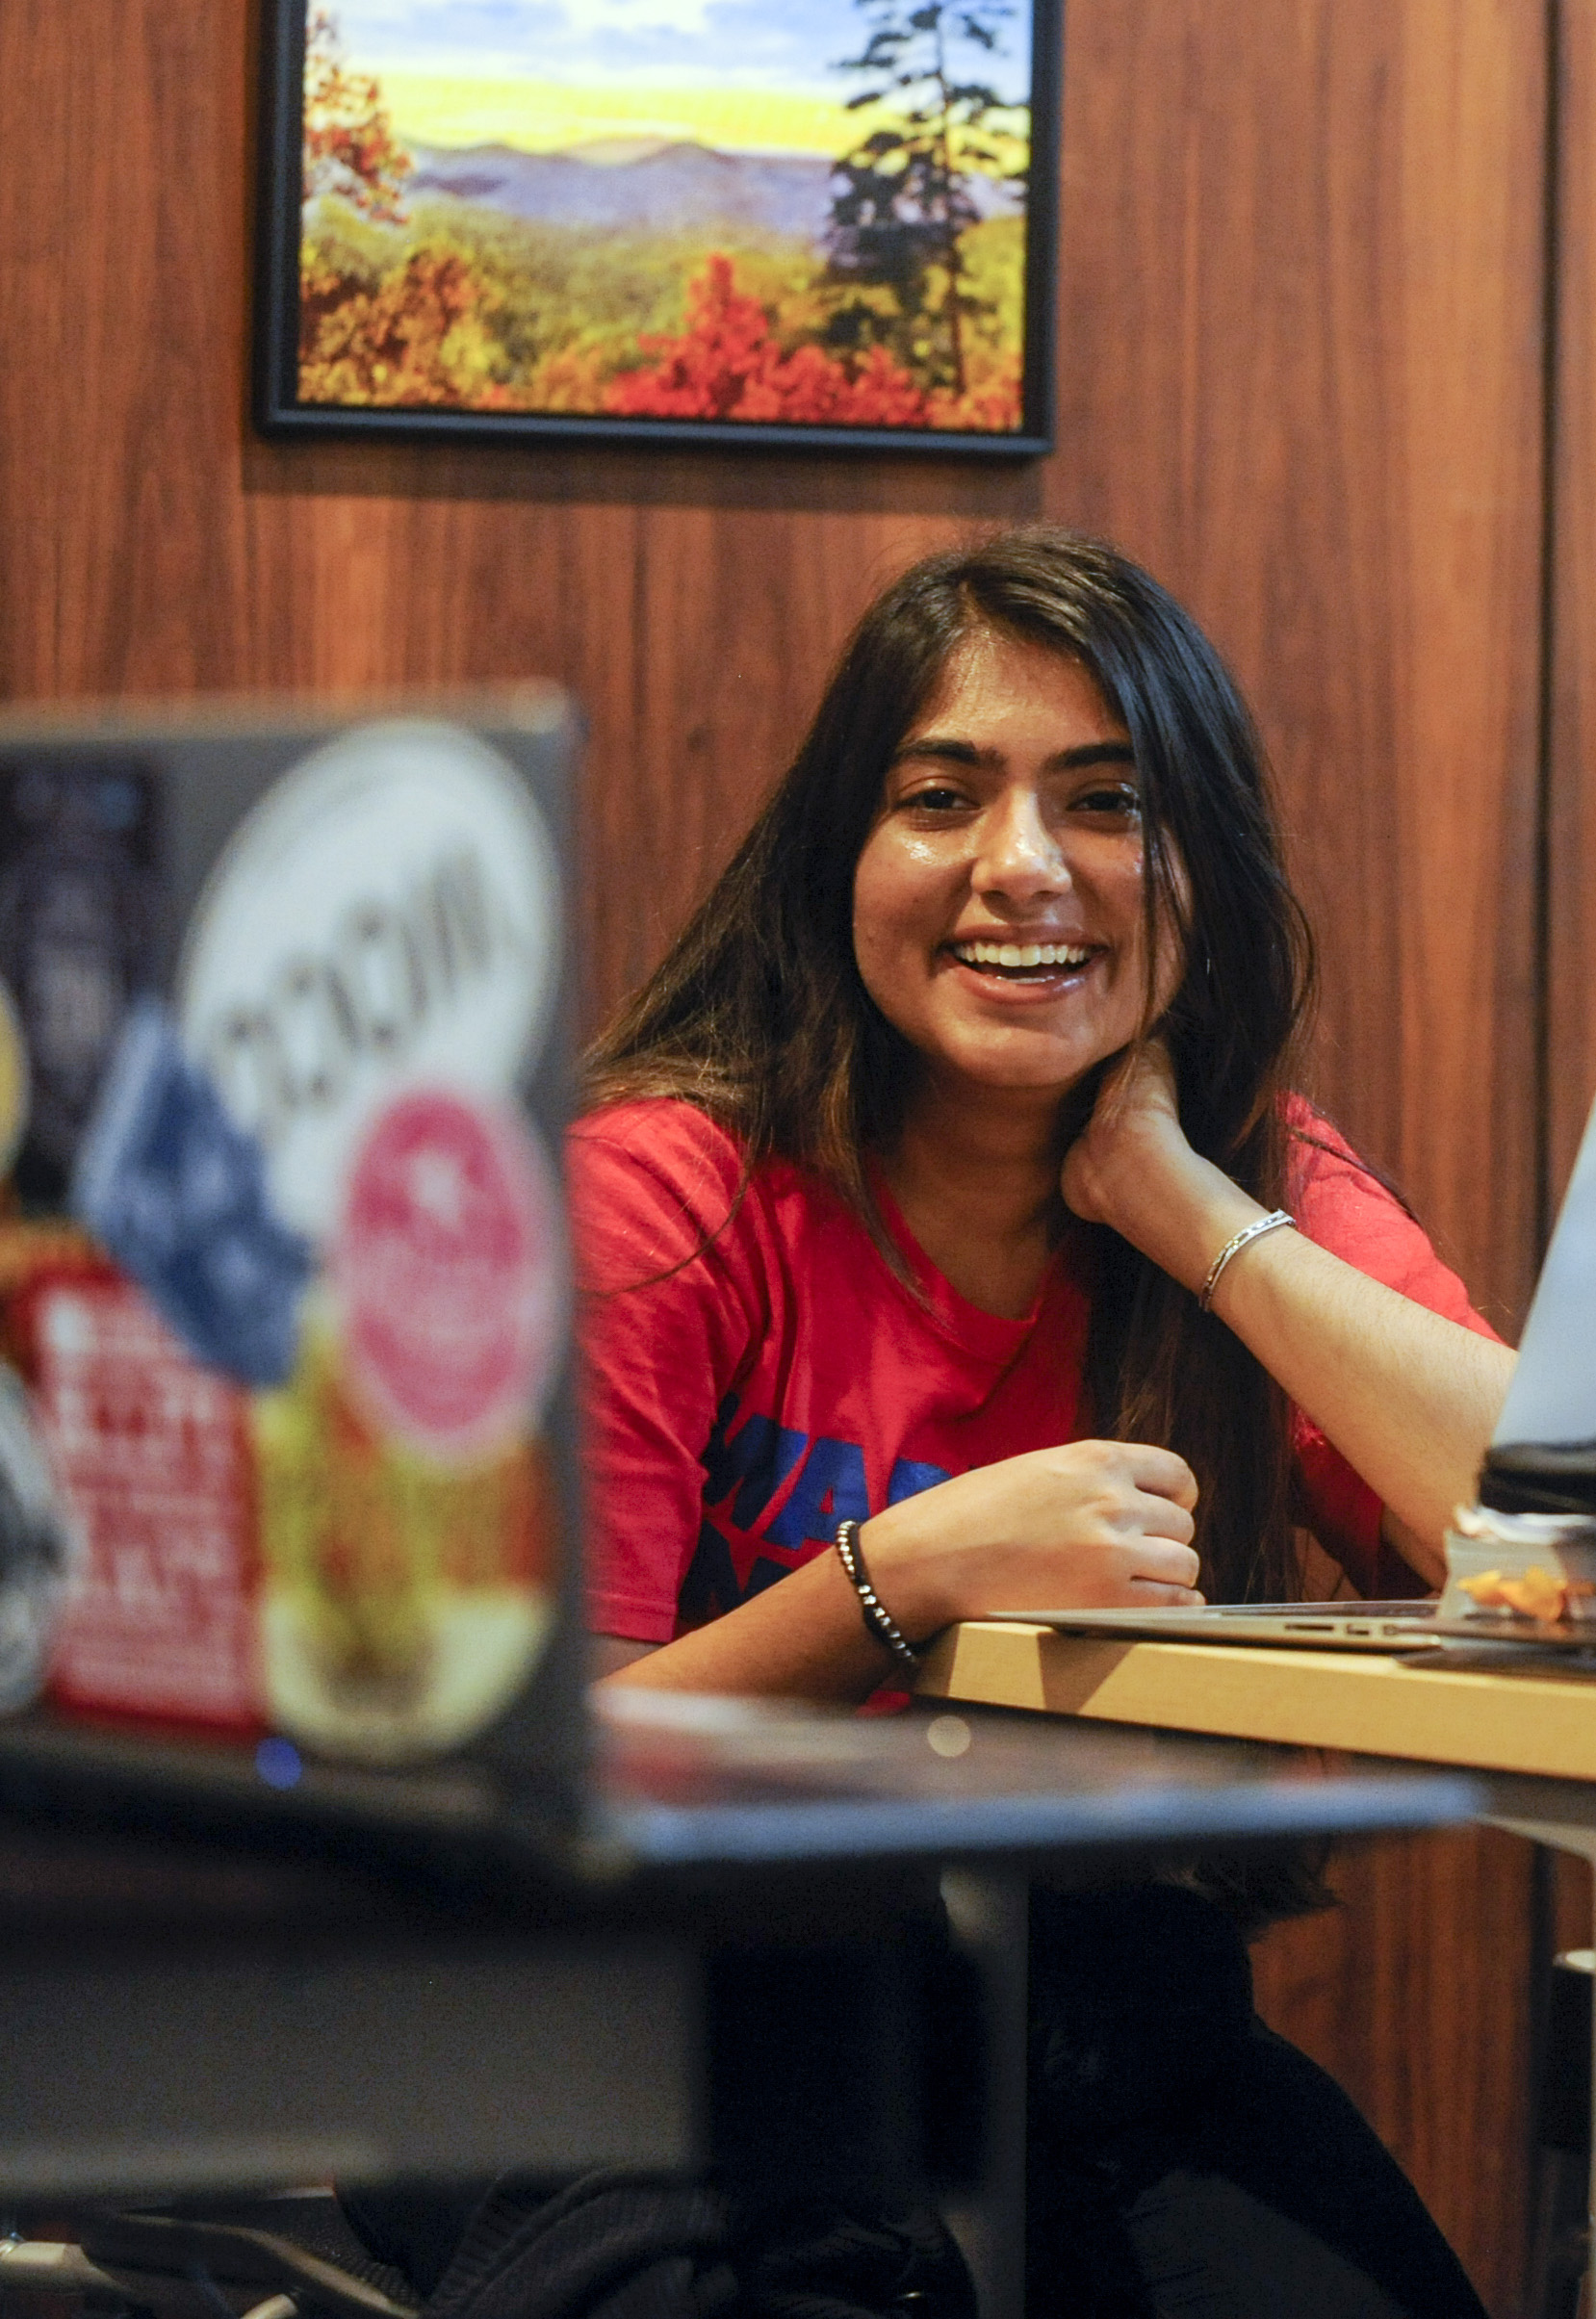 Shivani Mahajan, a student at Wofford College in Spartanburg, South Carolina, enjoyed her experience in a class in her Humanities 101 course, which allowed her to connect with peers in Egypt and Lebanon.